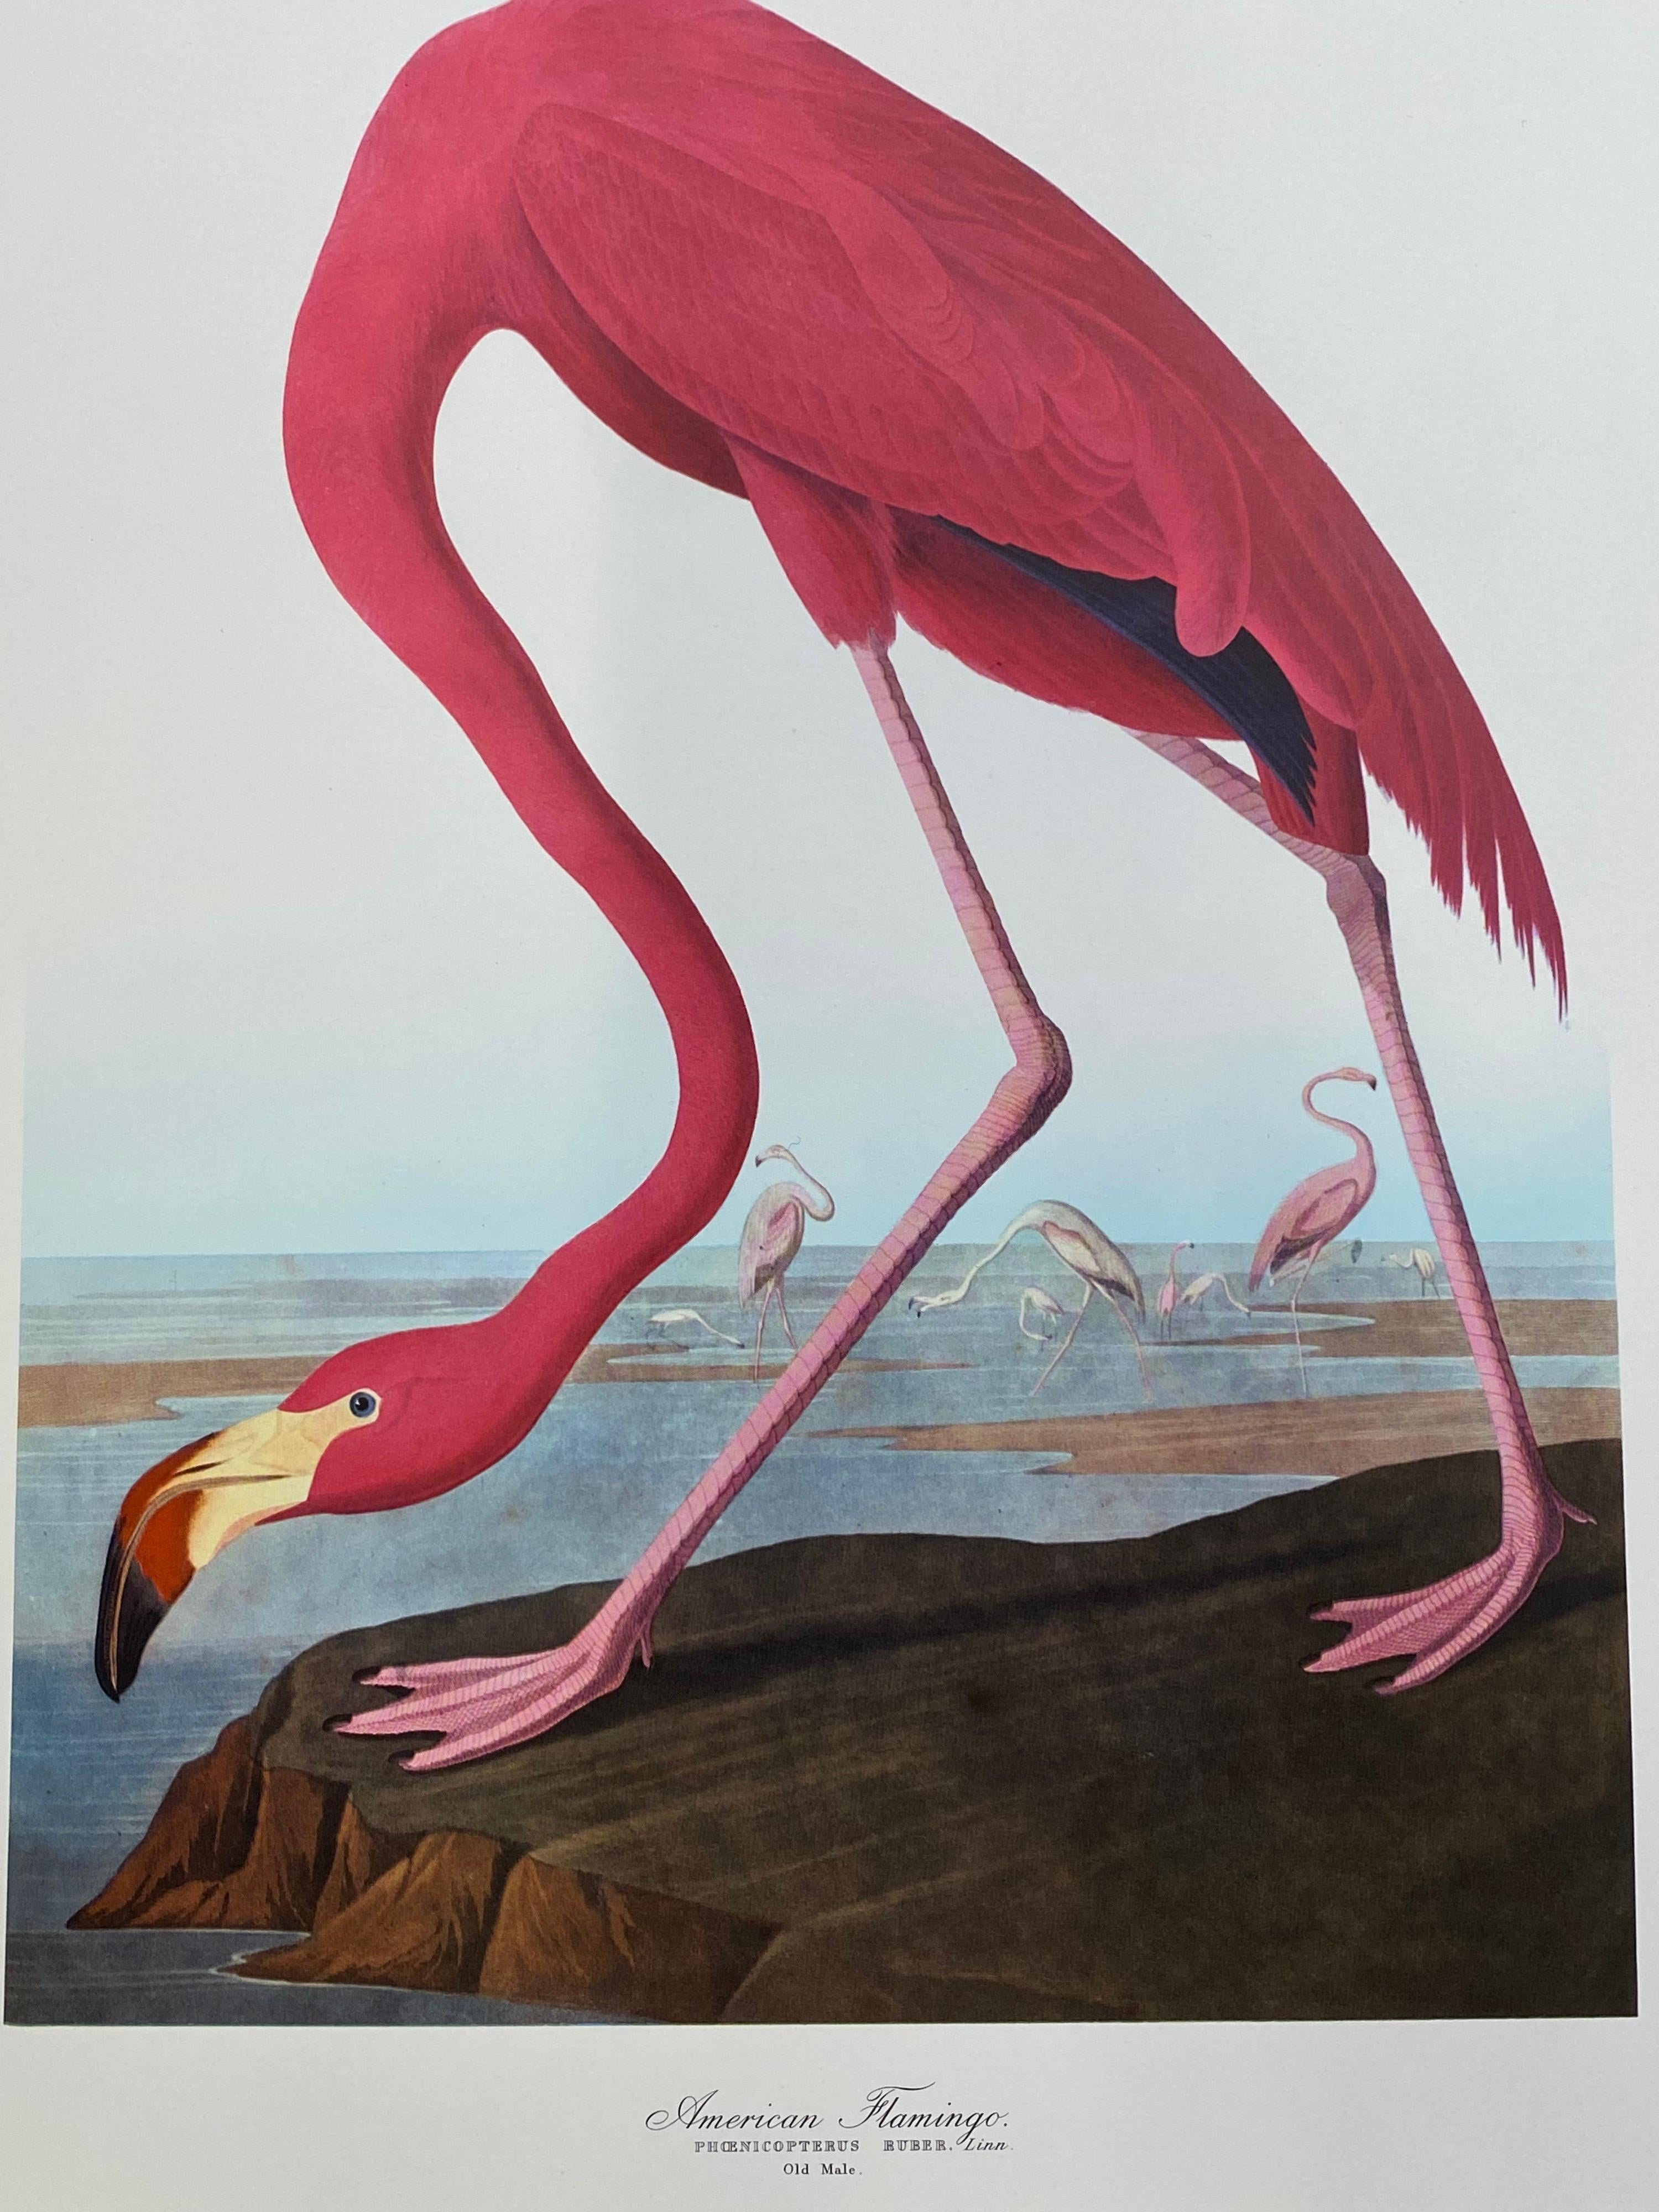 Classical Bird print, 
after John James Audubon, 
printed by Harry N. Abrams, Publishers, New York
unframed, 17 x 14 inches color print on paper
condition: very good
provenance: from a private collector here in the UK. 

Free Shipping